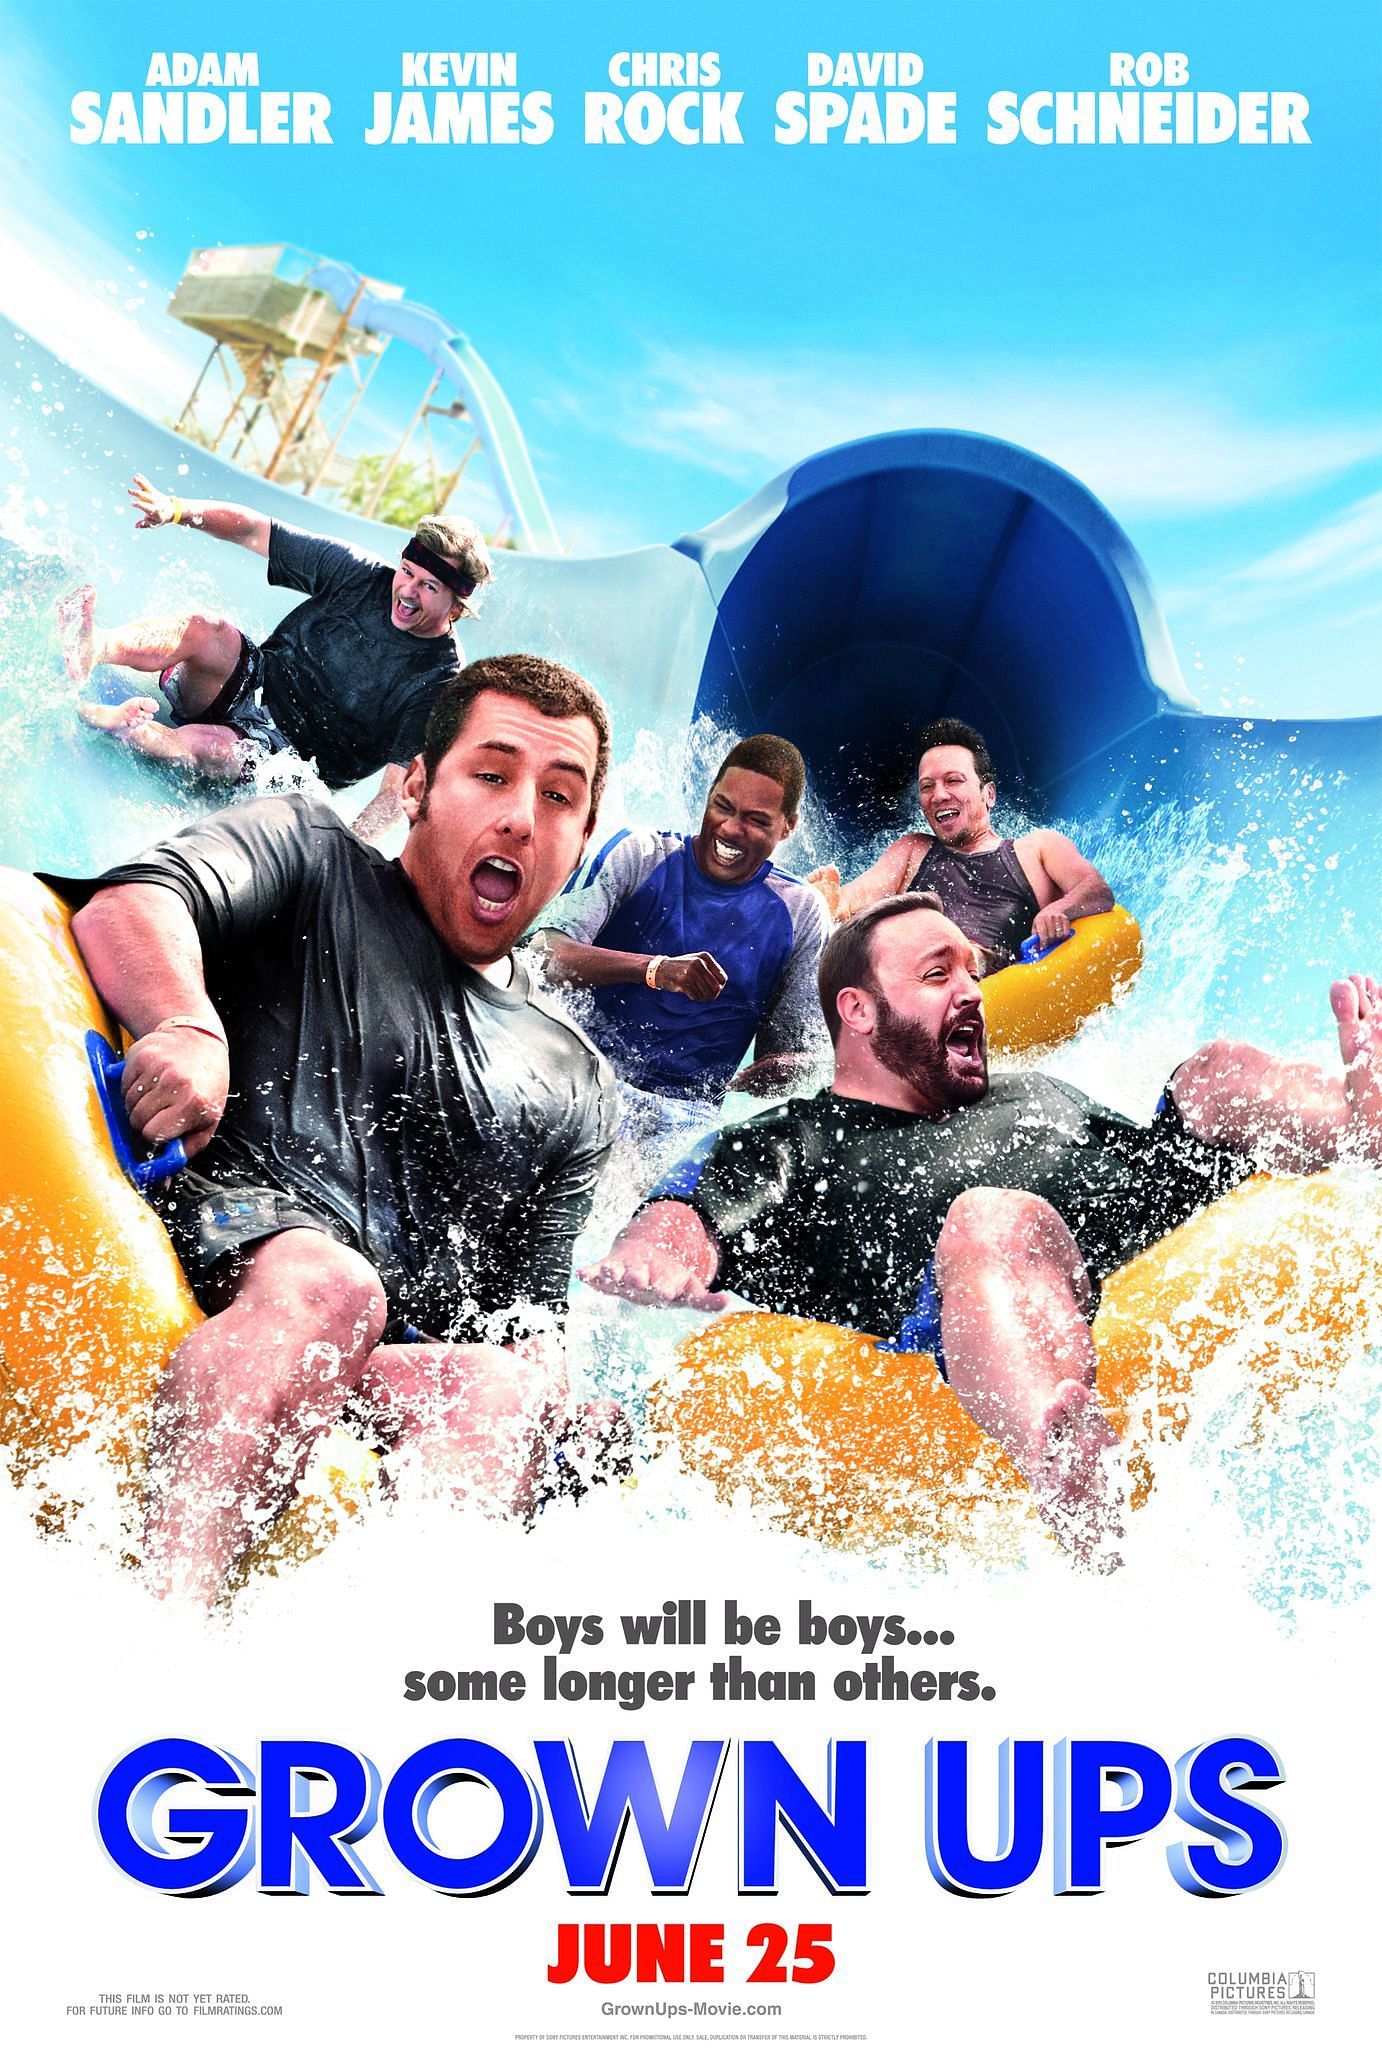 Grown Ups, 2010 (Image via Columbia Pictures)